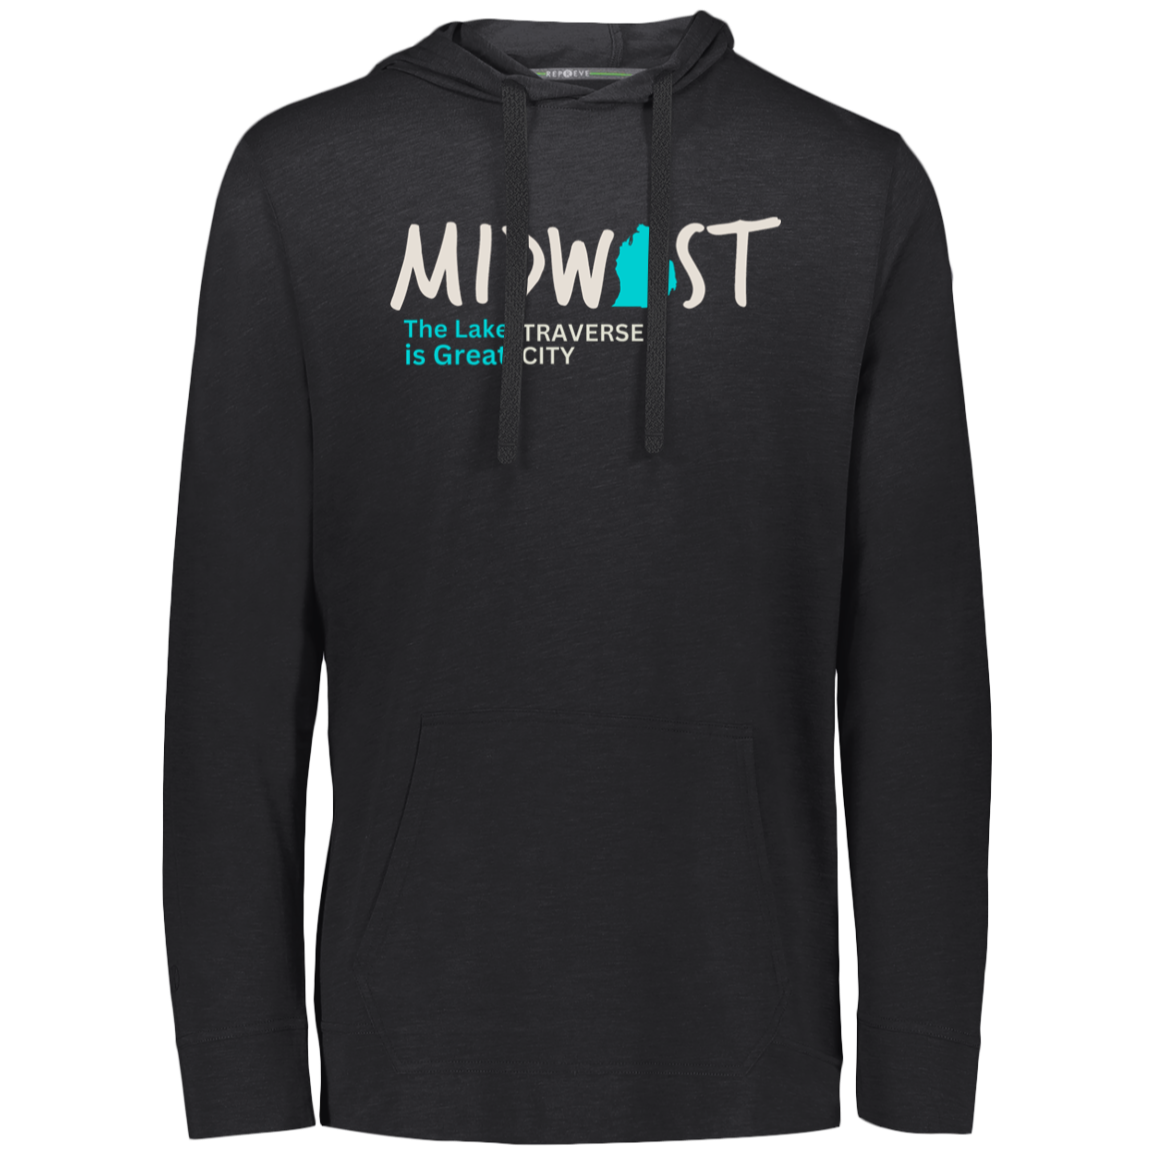 Midwest The Lake is Great Traverse City  Eco Lightweight Hoodie